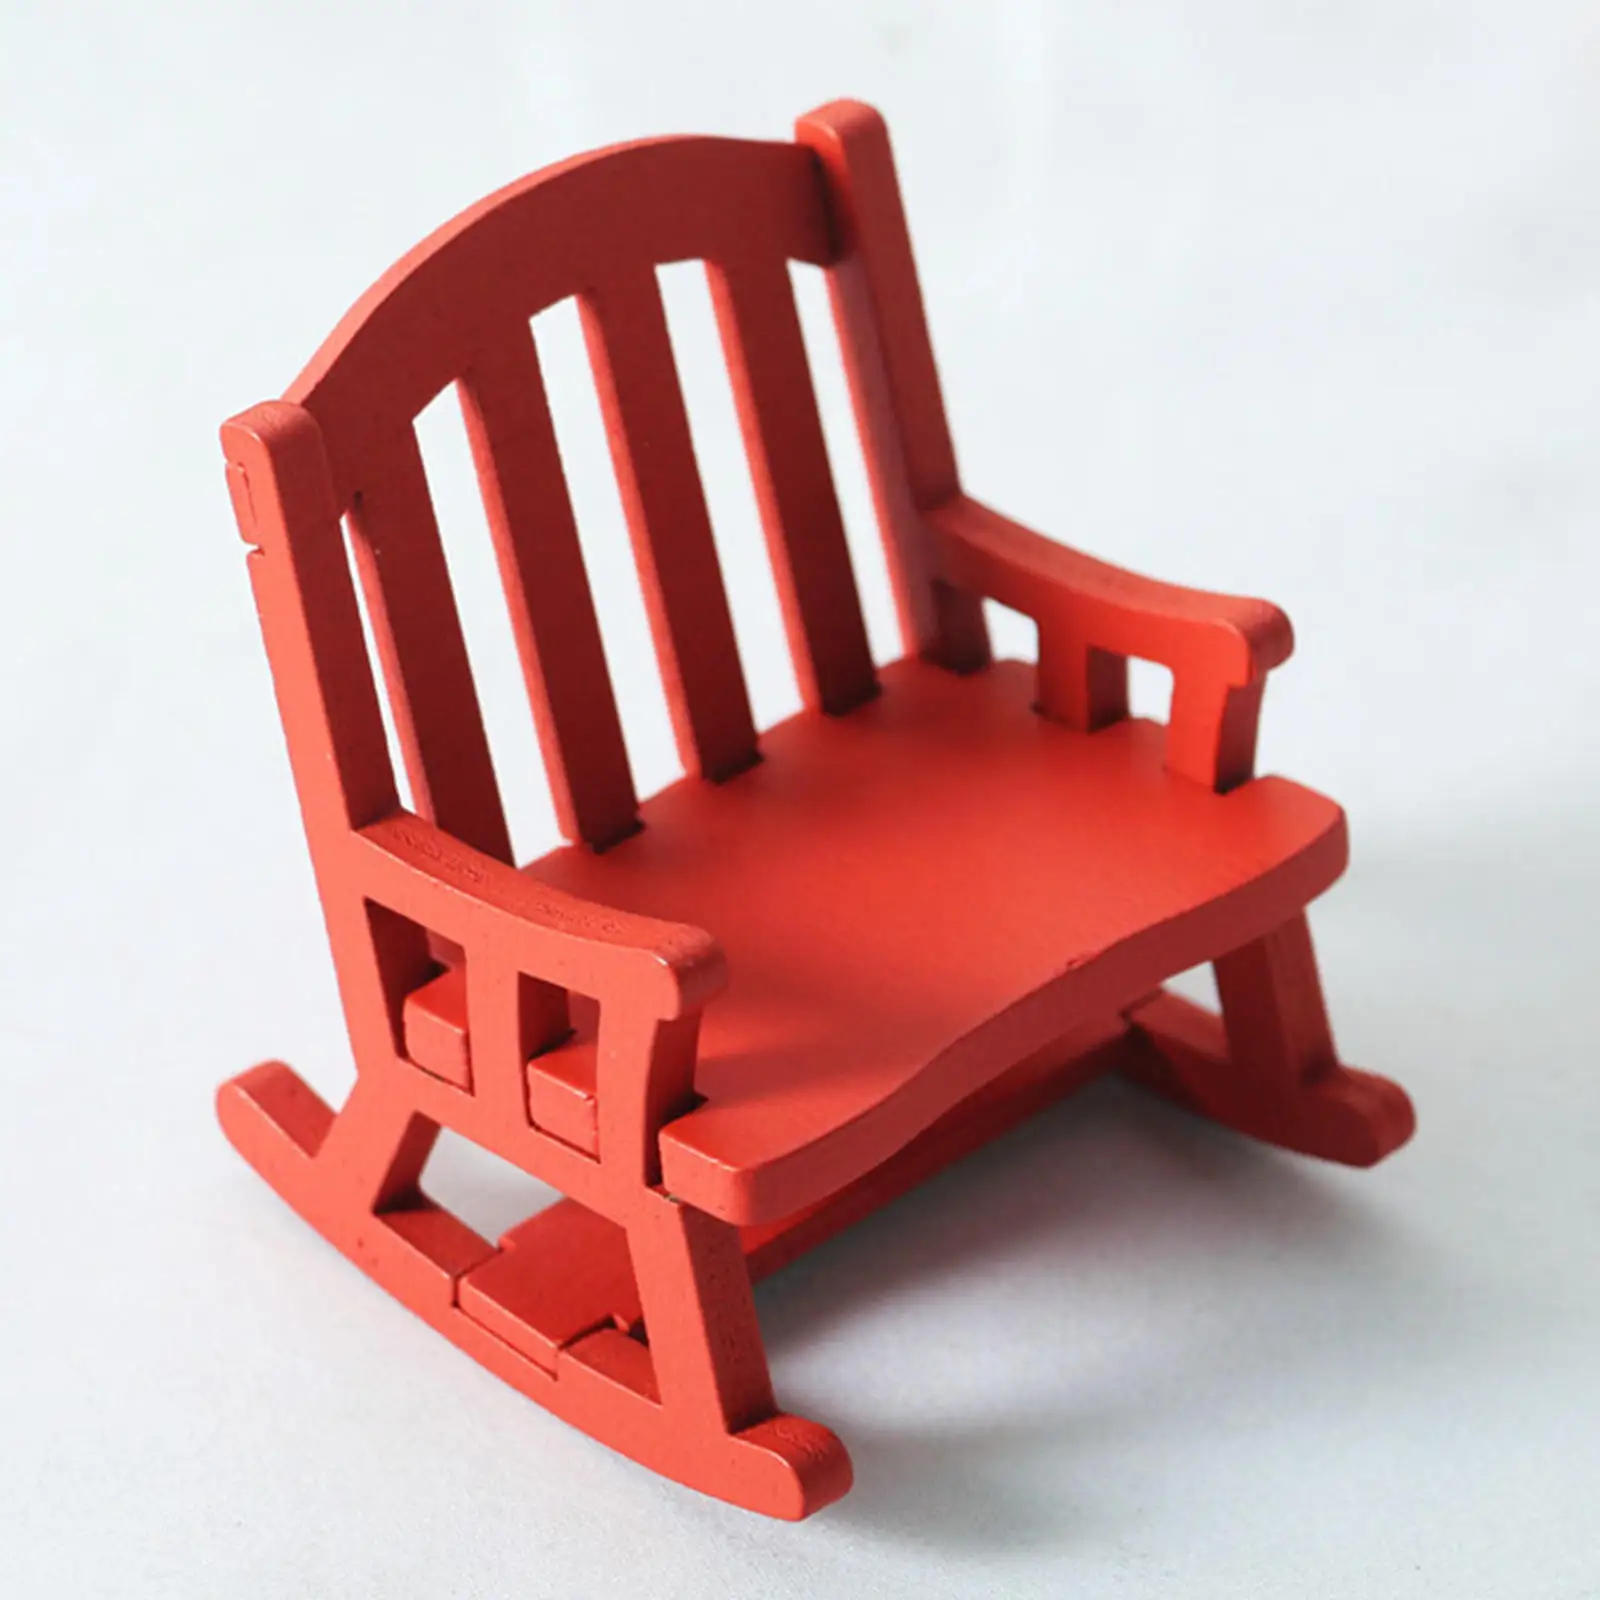 Wooden Miniature Rocking Chair Dollhouse Furniture Accessory Decor Playhouse Furniture